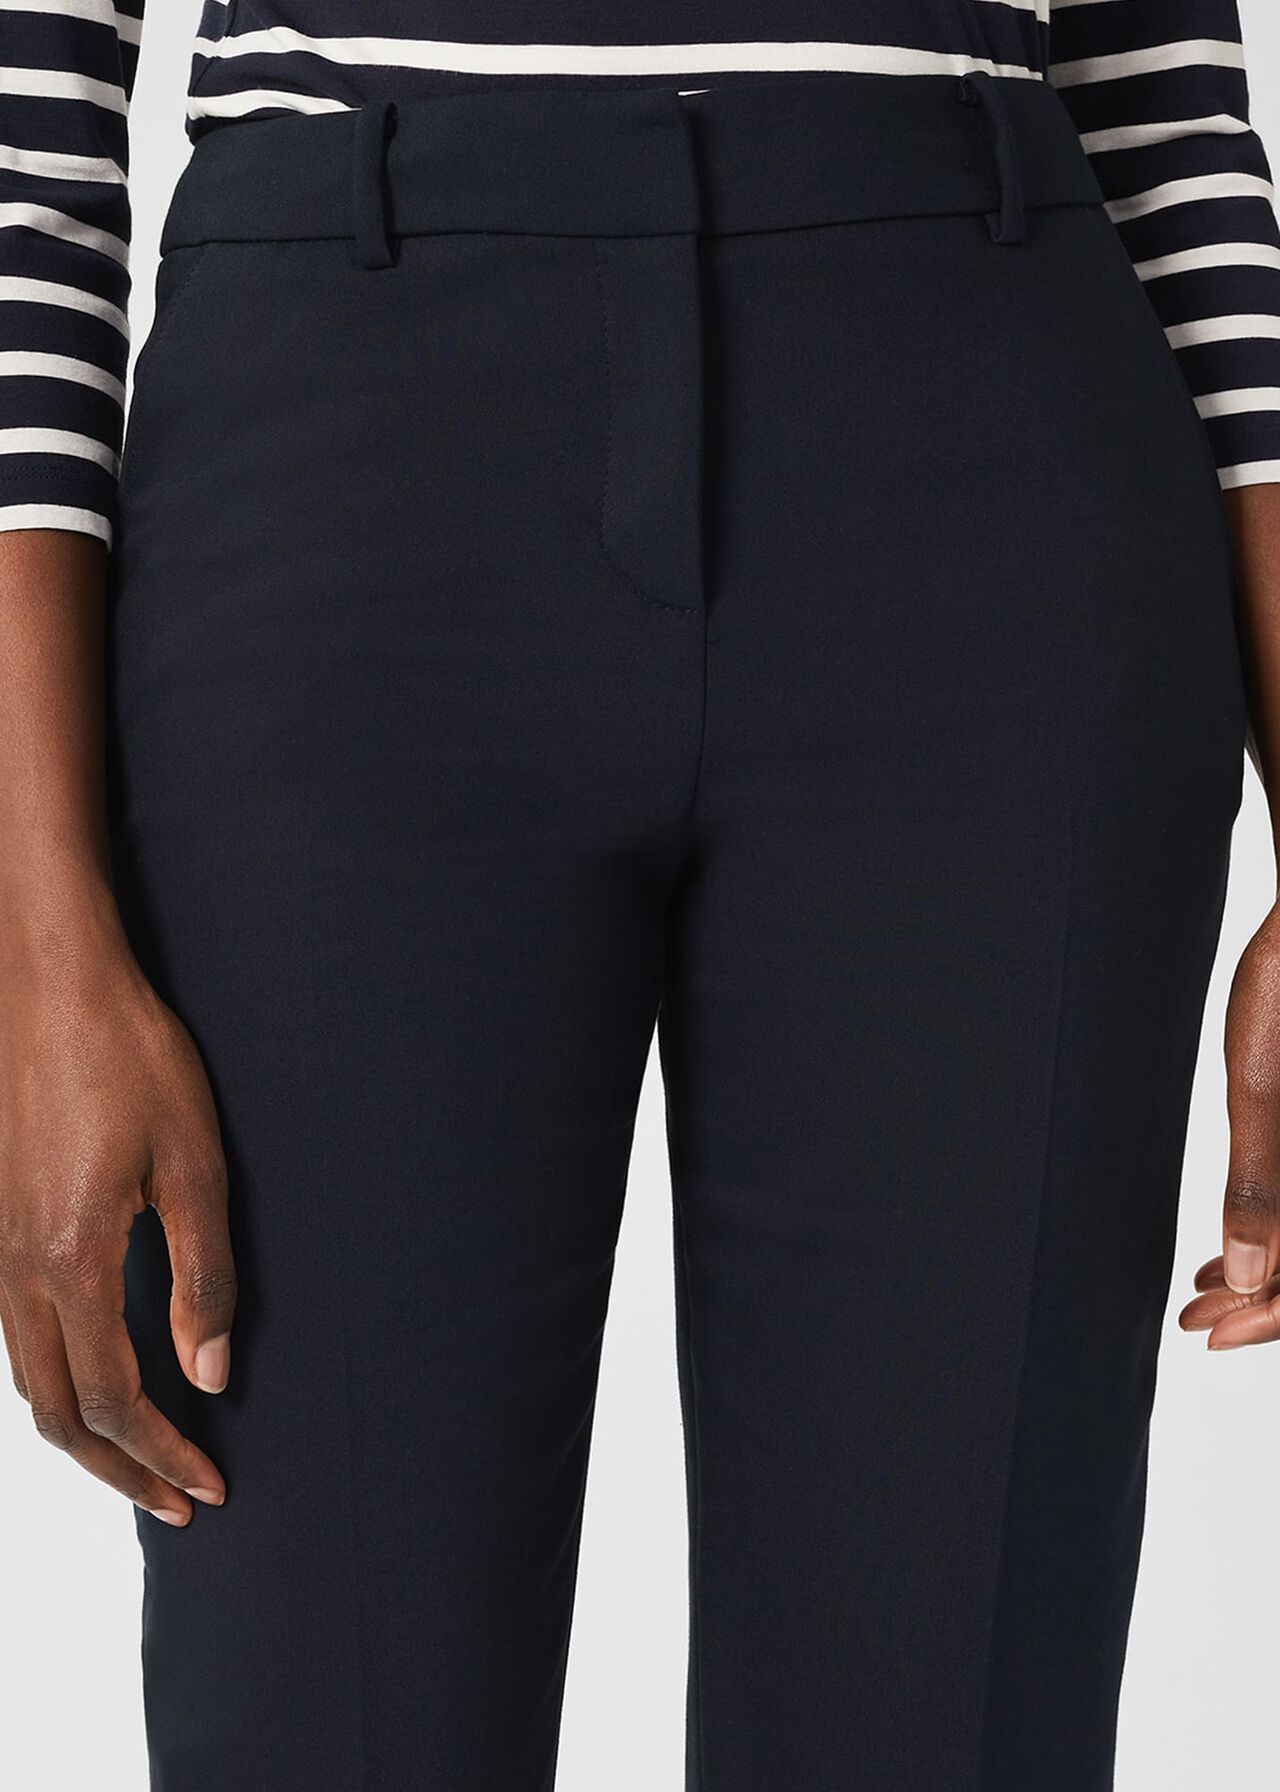 Quin Tapered Trousers, Navy, hi-res